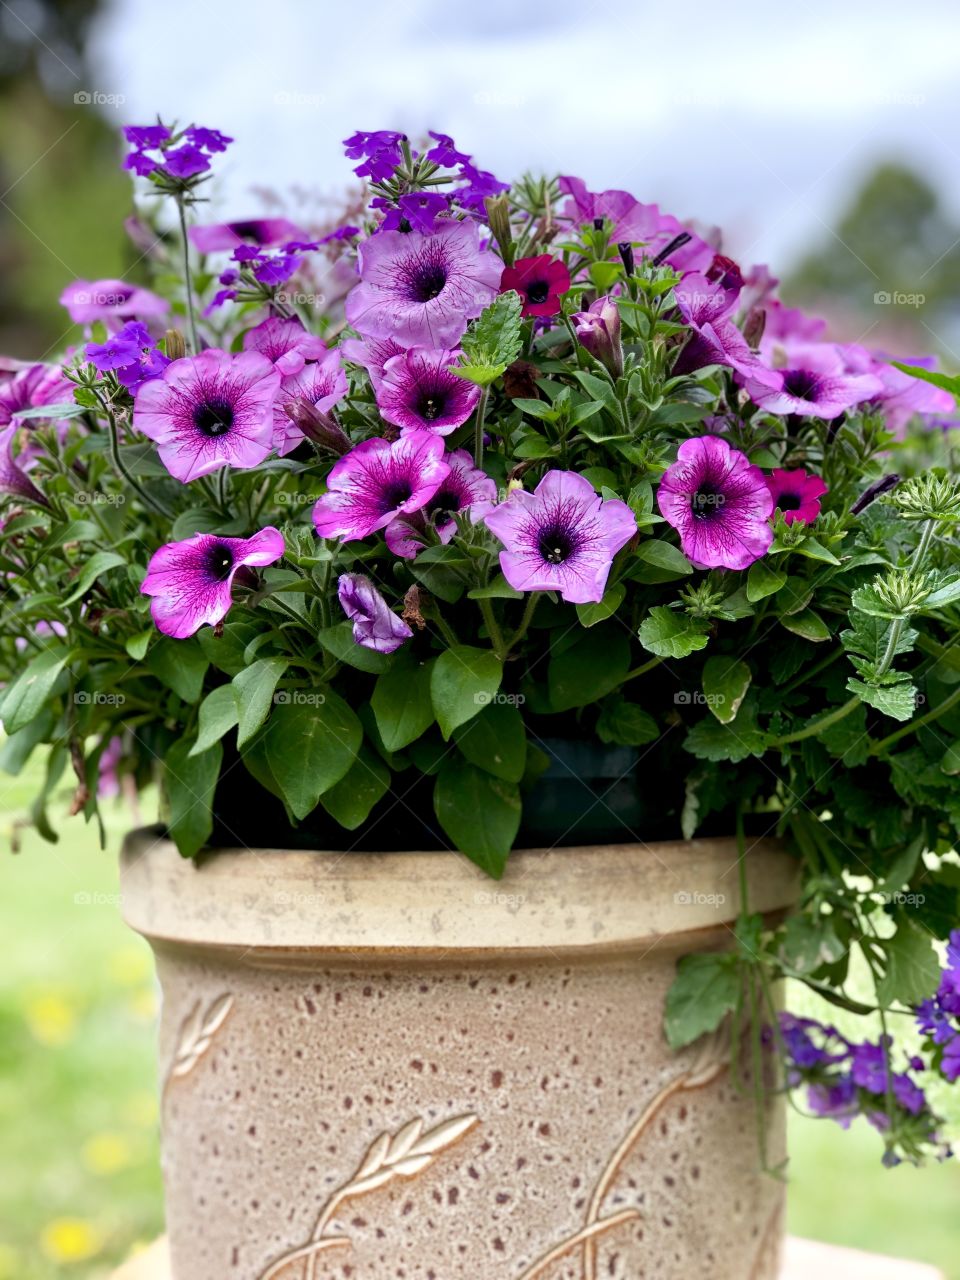 Purple and hot pink flowers against green leaves in a pot against a green background